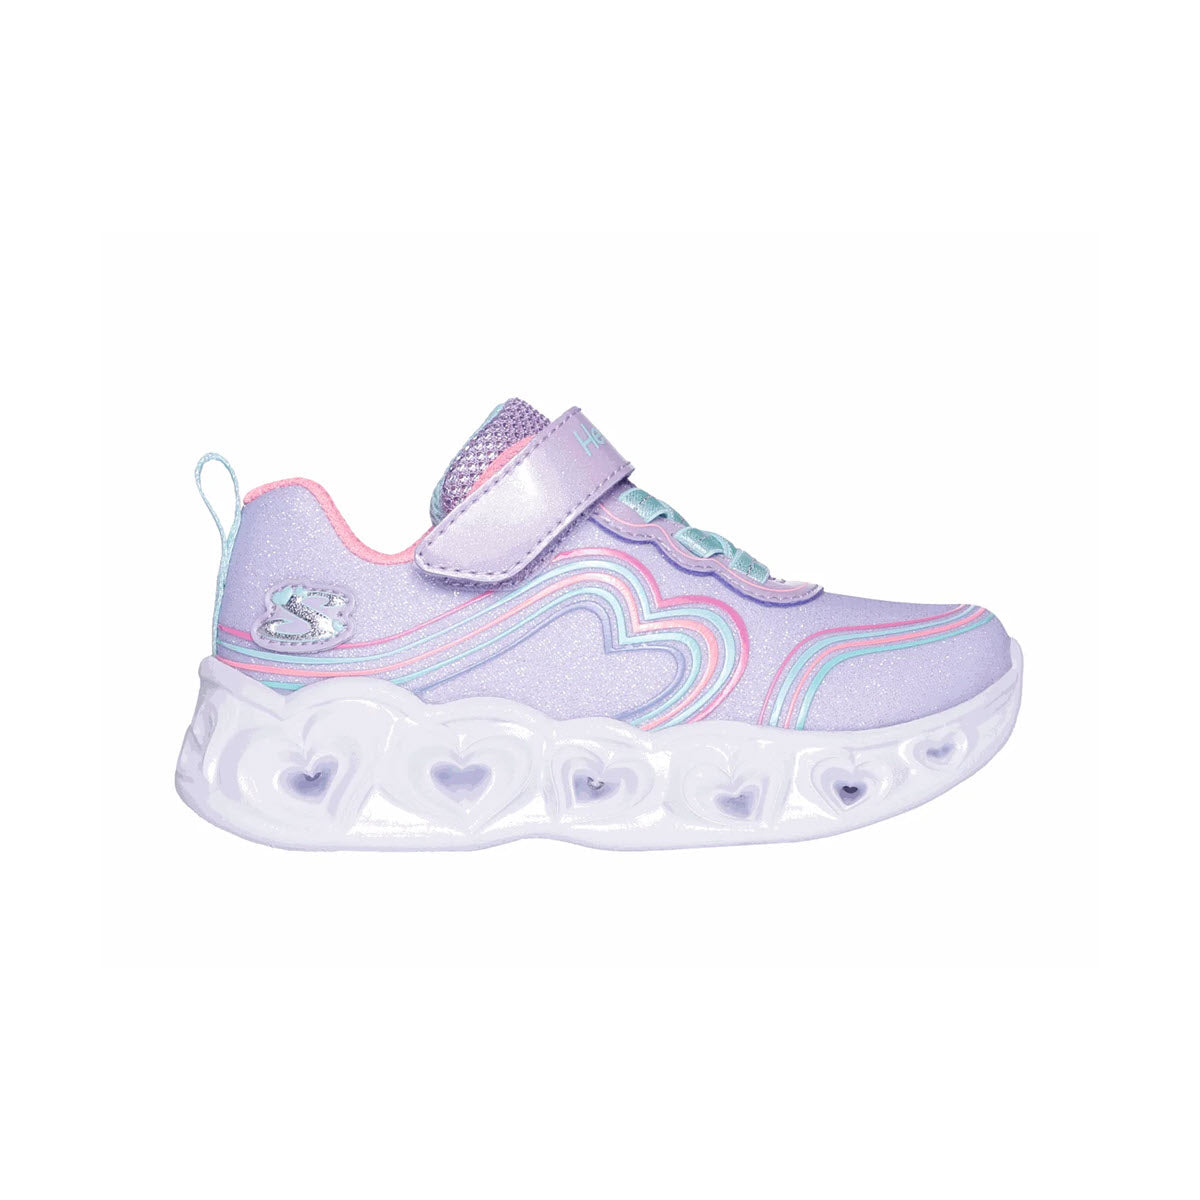 A child&#39;s sneaker by Skechers Heart Lights Retro Hearts Lavender Multi - Kids in pastel colors with velcro straps and a cushioned sole.